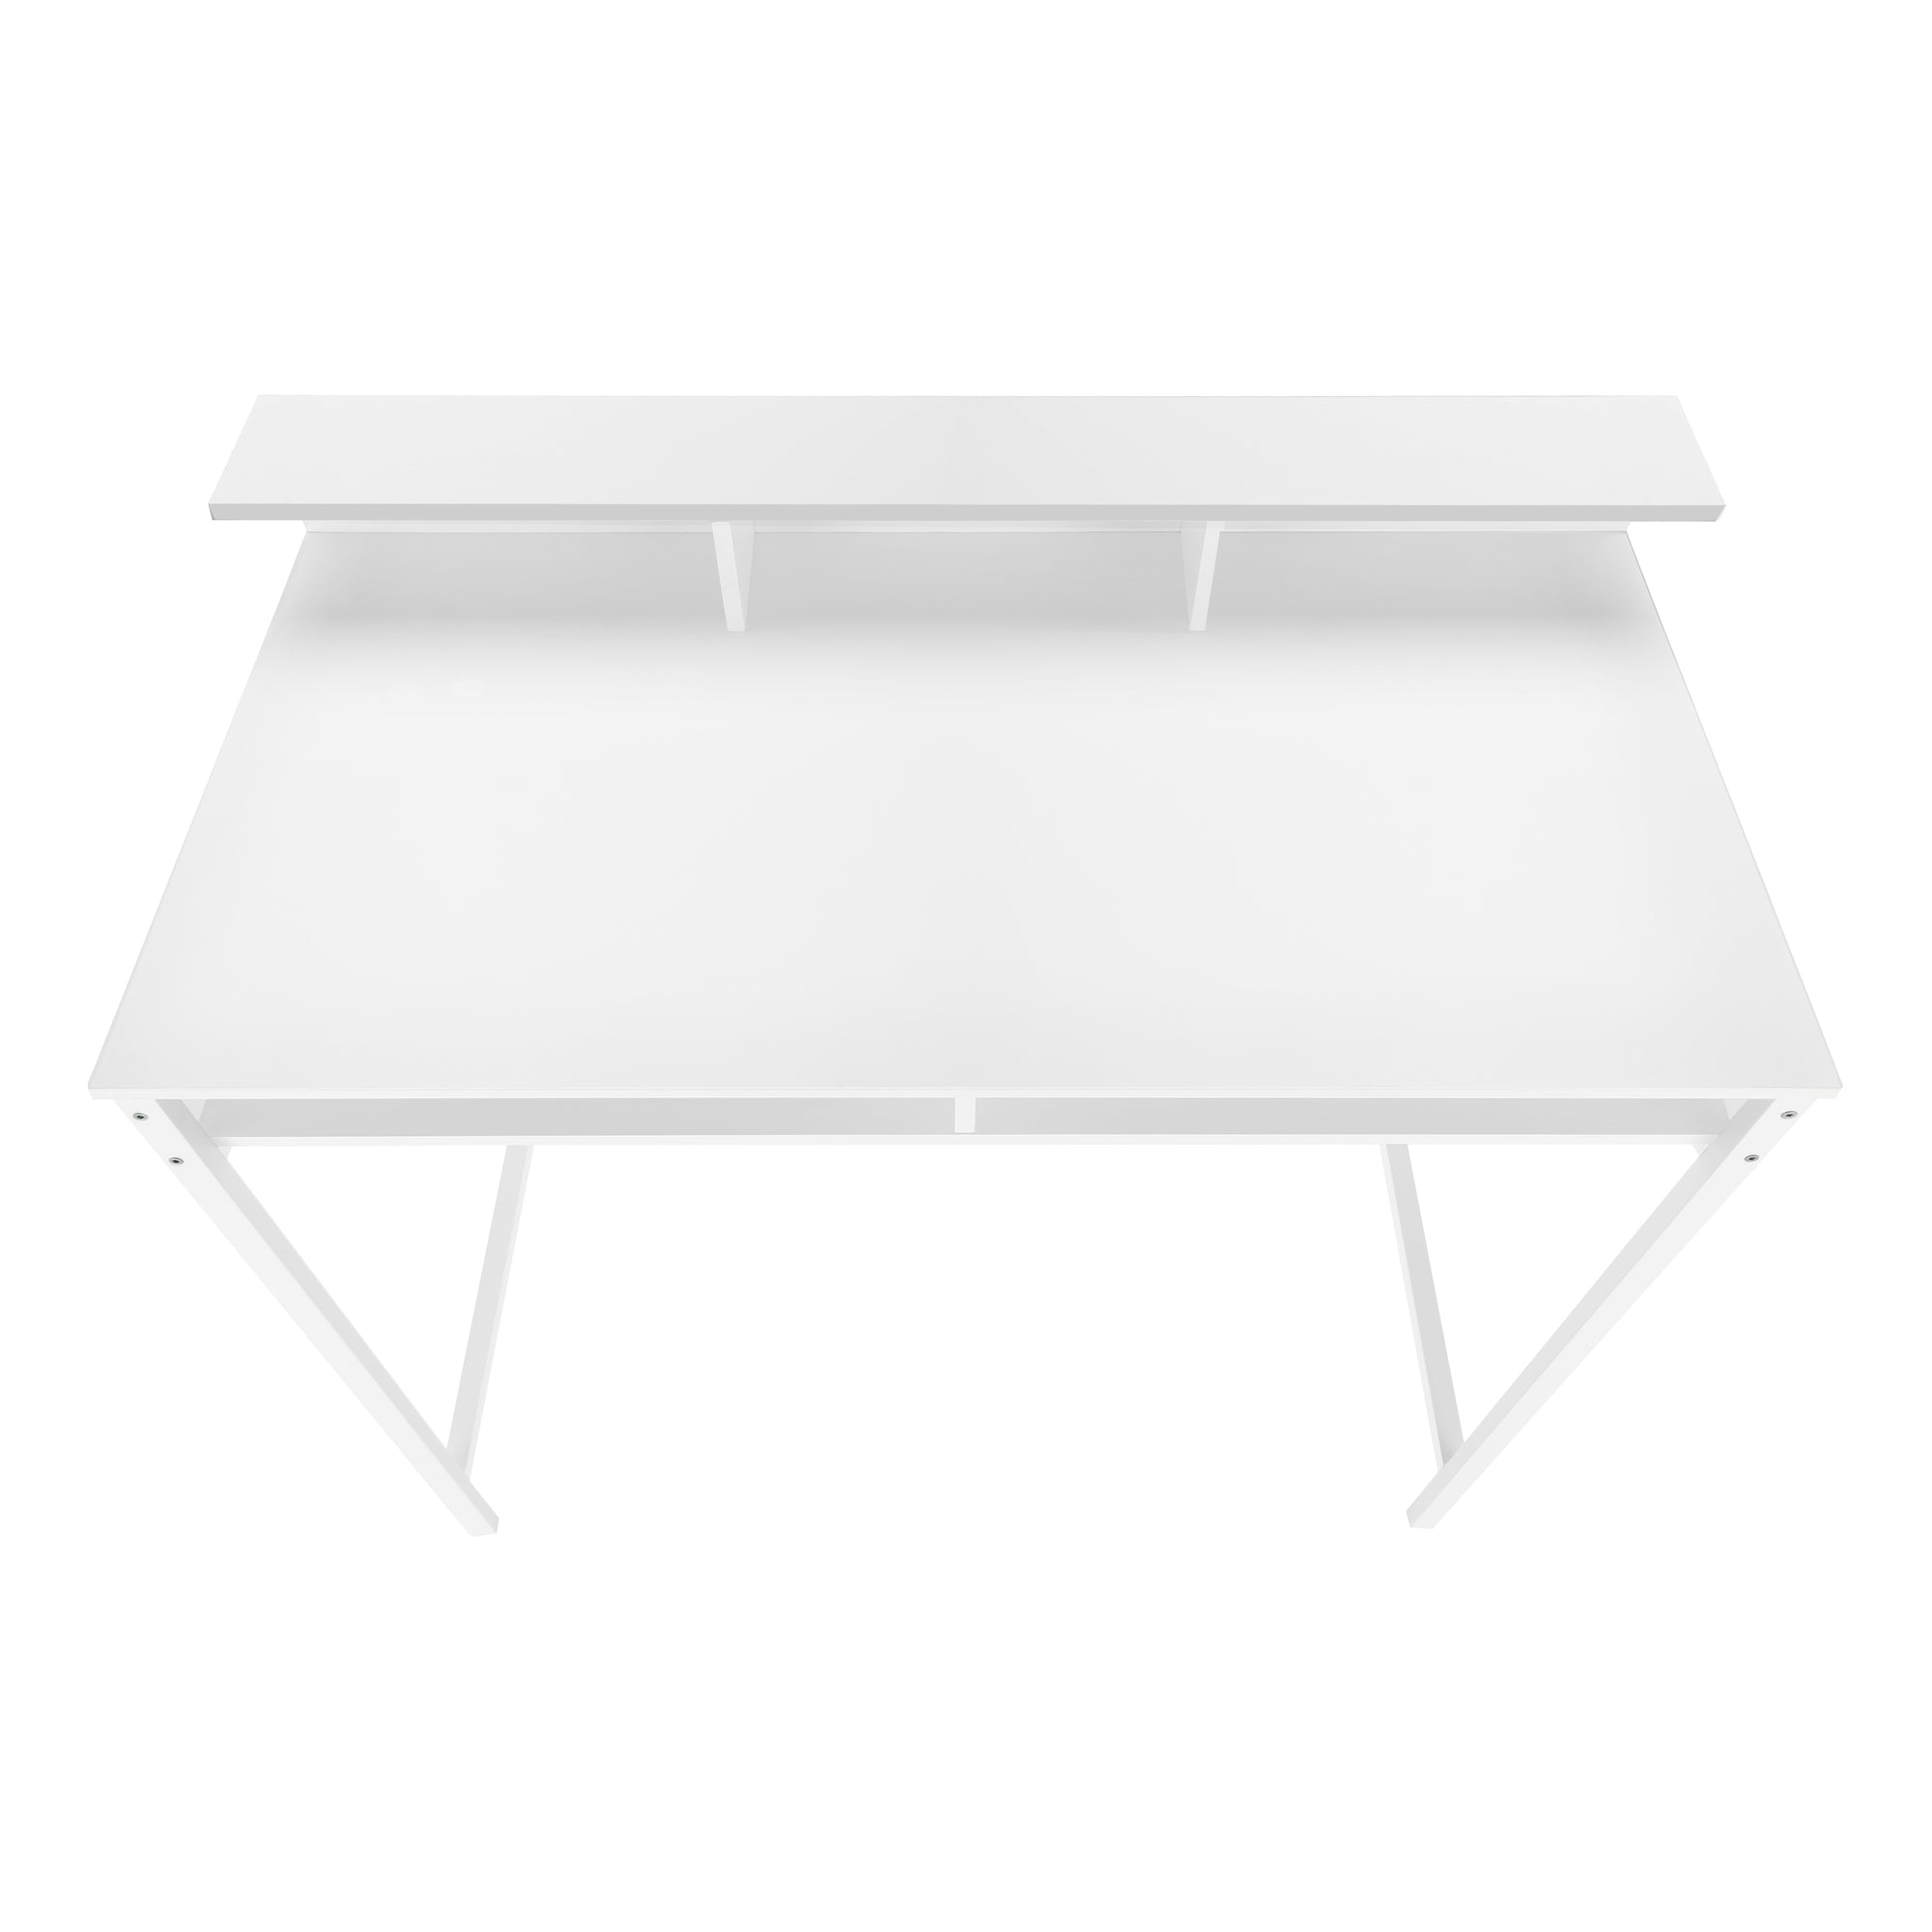 MN-847701    Computer Desk, Home Office, Standing, Storage Shelves, 48"L, Metal Legs, Laminate, White, Contemporary, Industrial, Modern